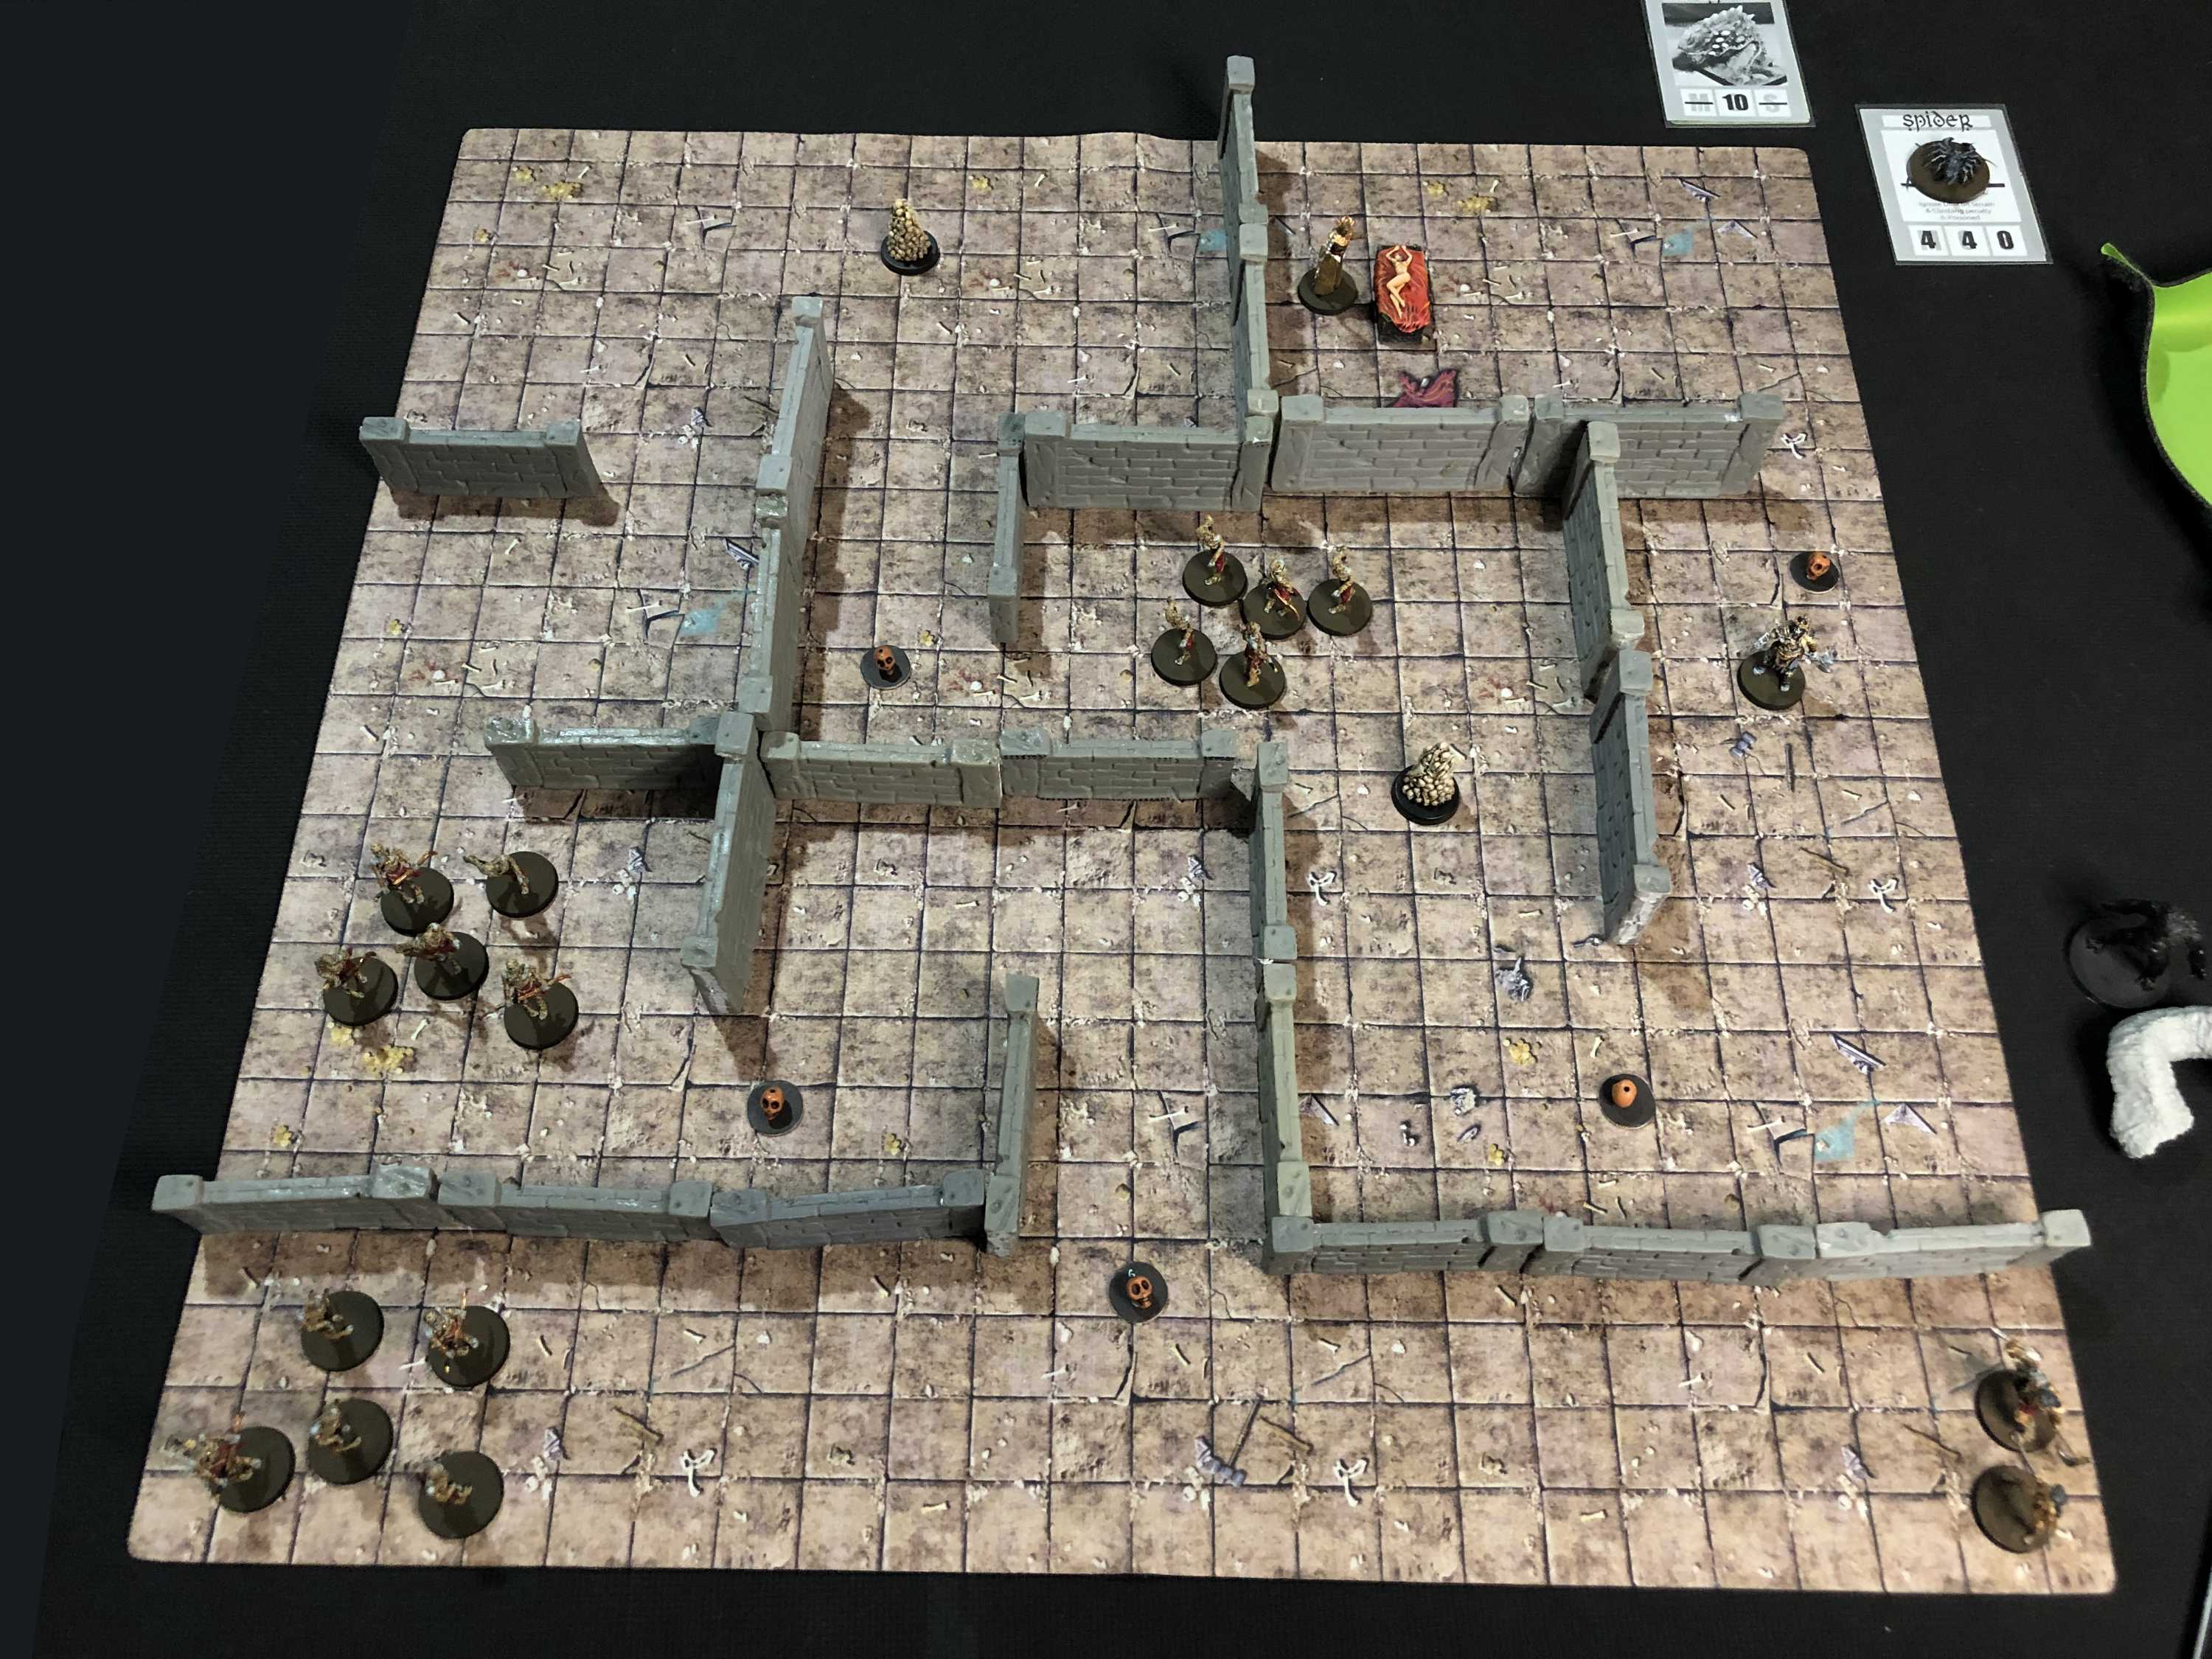 4'x4' board tiles done! For Skirmish Games/D&D. Magnetized for quick change  and durability when setup. : r/TerrainBuilding